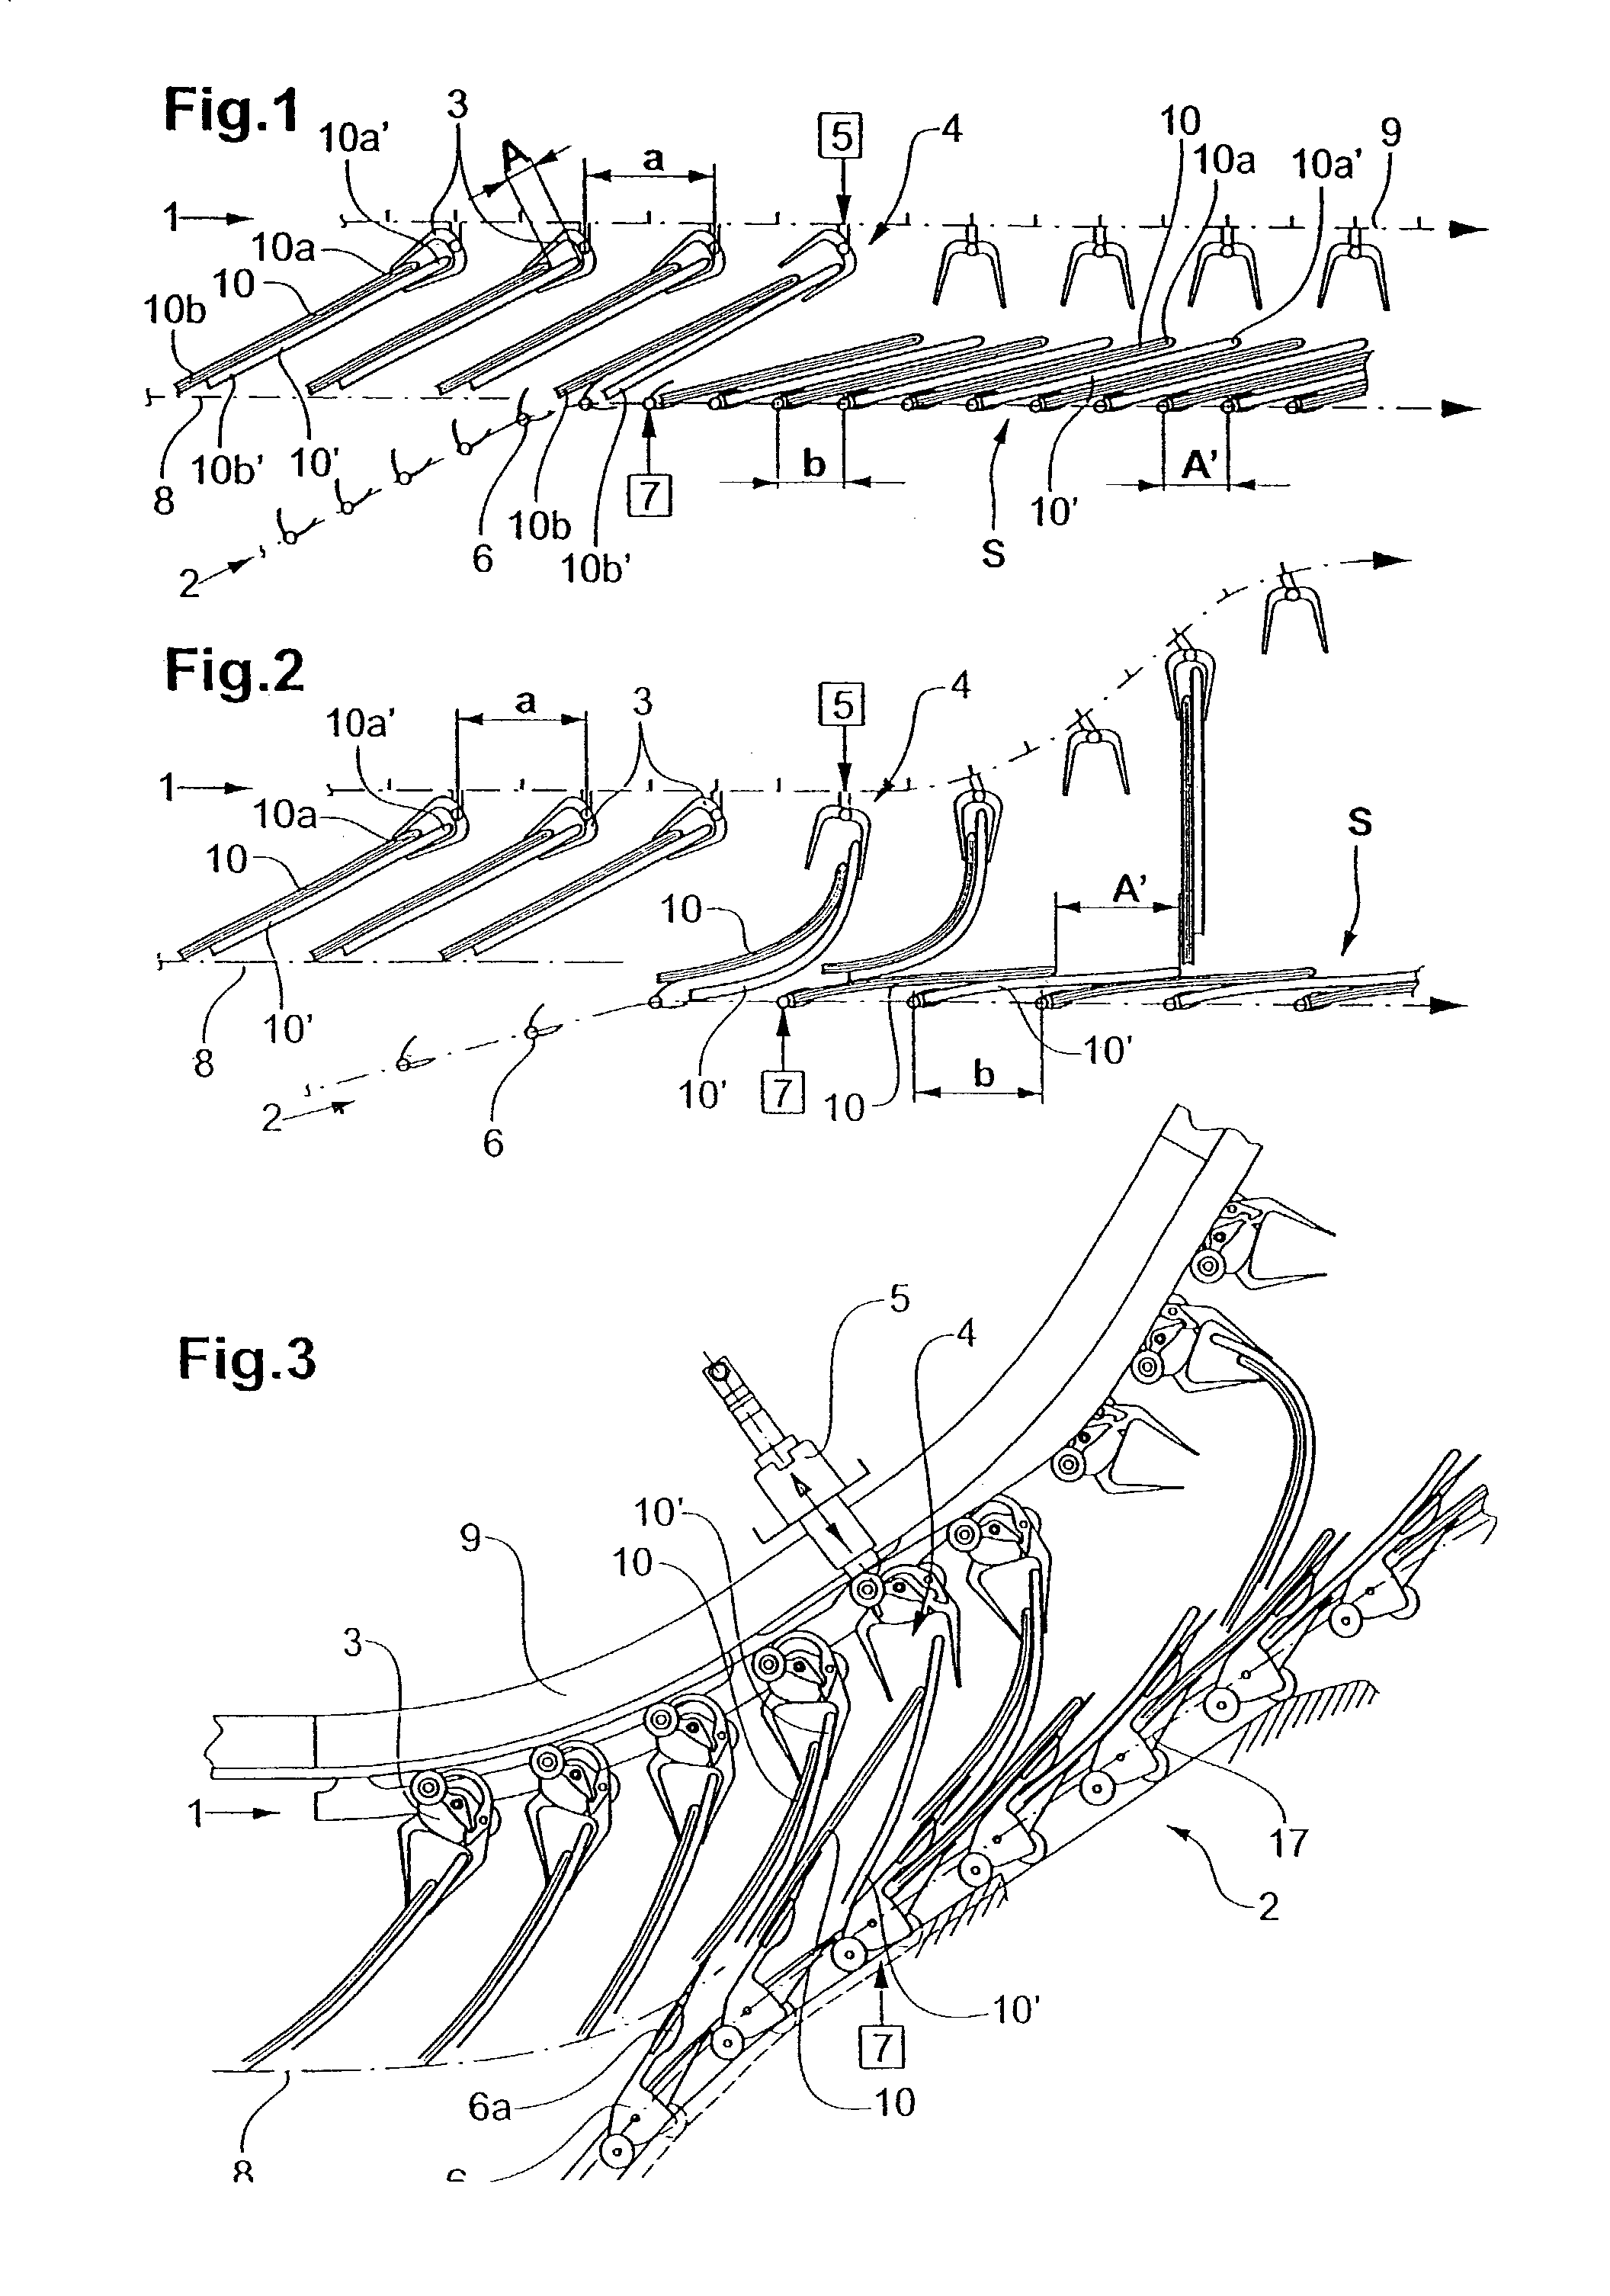 Method of, and apparatus for, conveying sheet like products